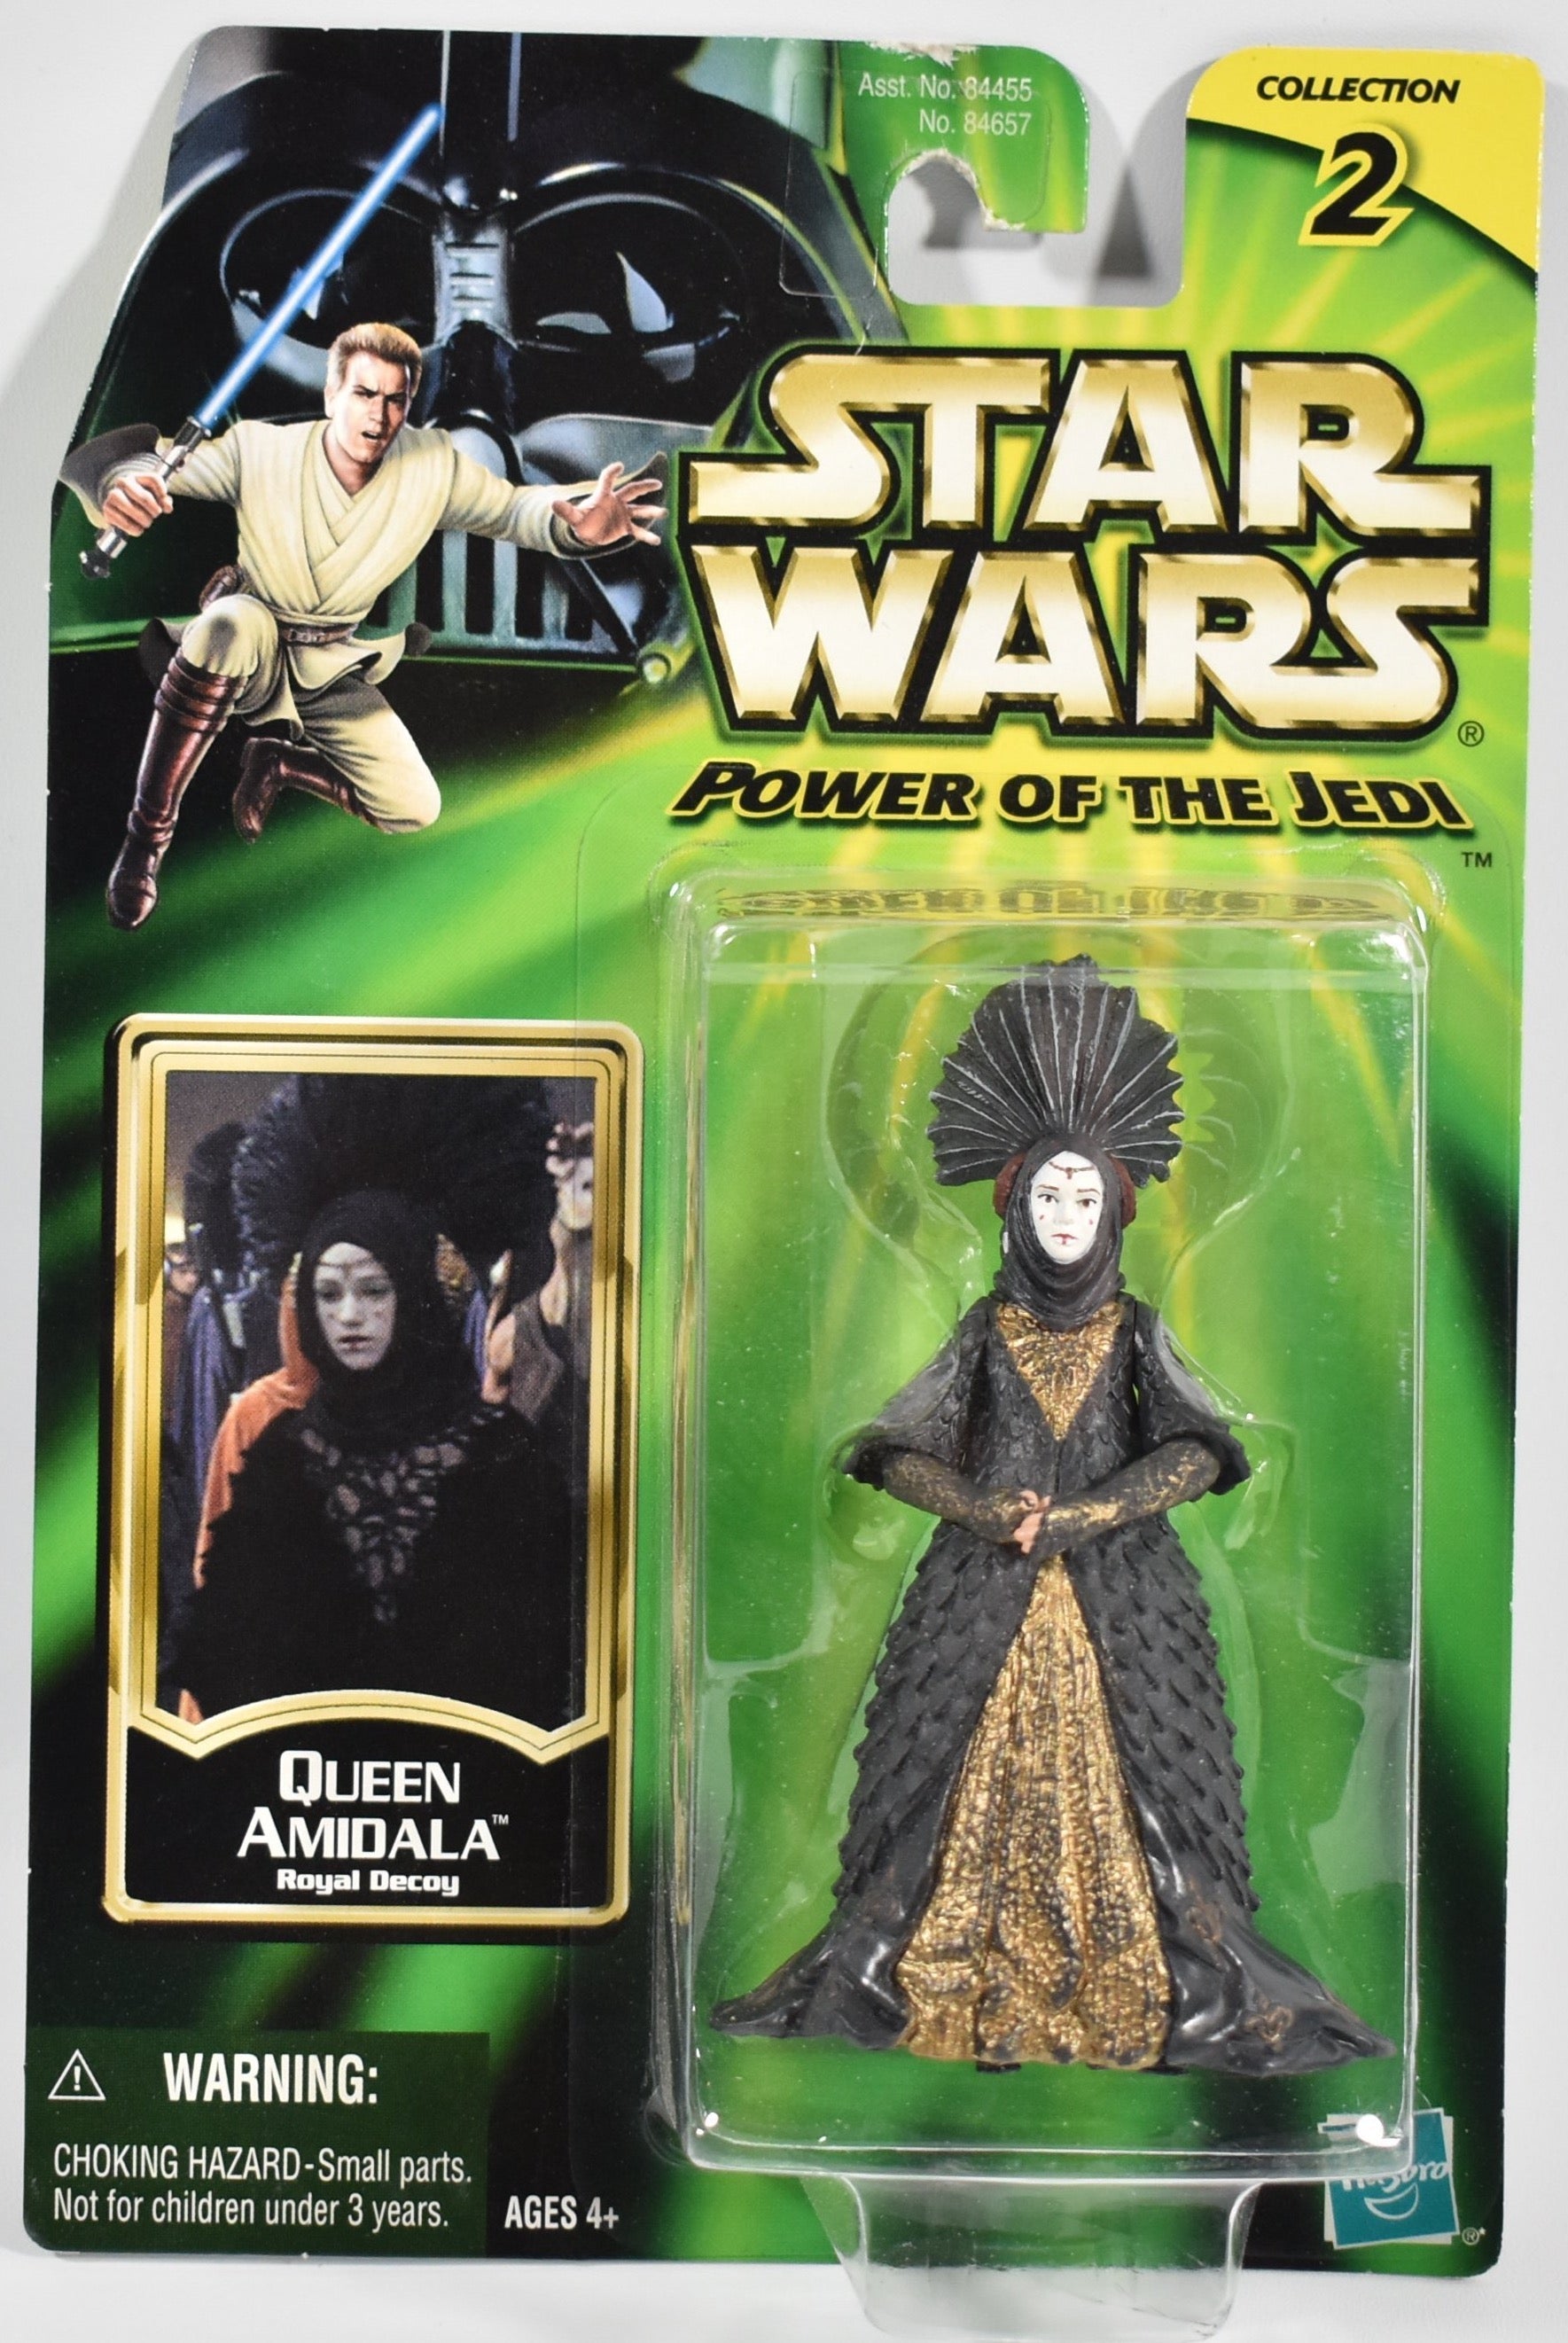 Star Wars Power of the Jedi Action Figure Queen Amidala Royal Decoy